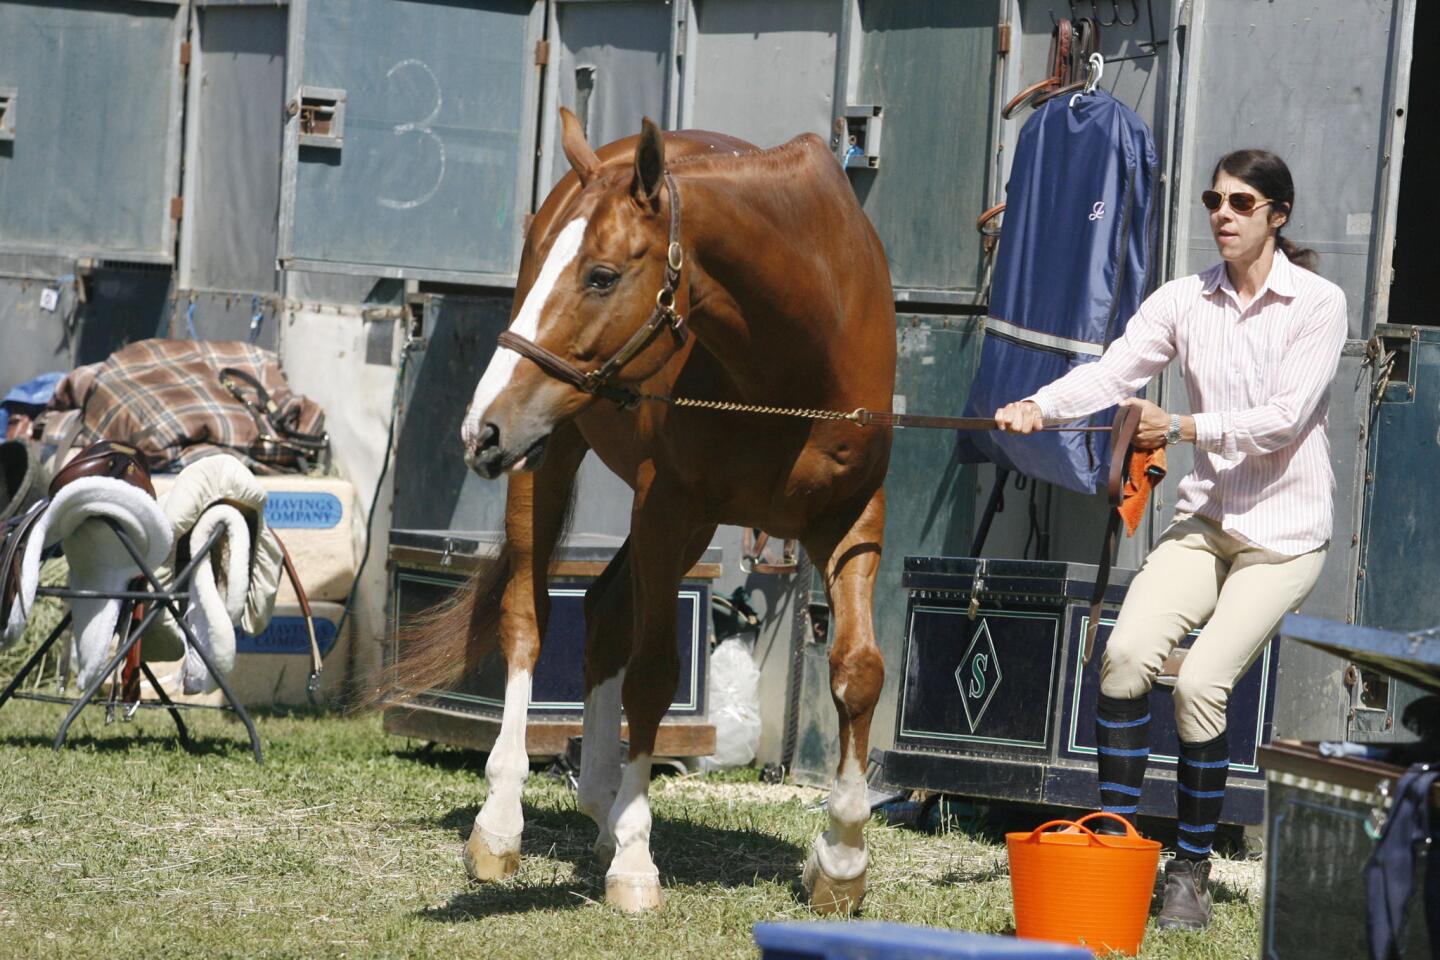 Melissa Bulick, right, takes Versace out of the barn before showering Versace during Flintridge La Cañada Guild's annual horse show on Saturday, April 28, 2012.